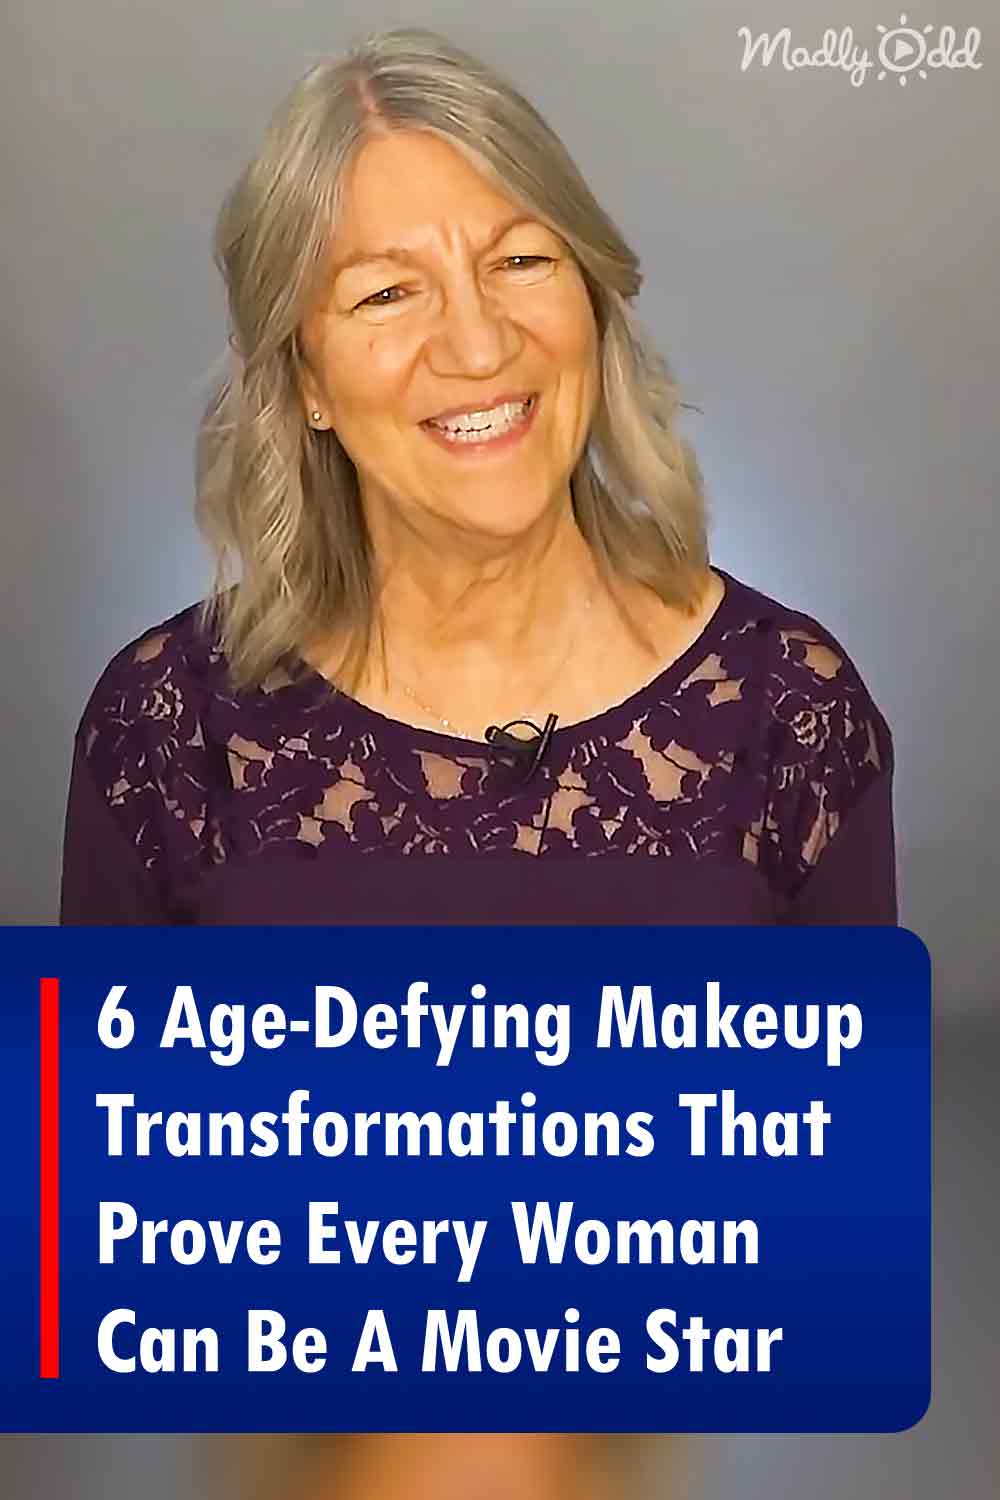 6 Age-Defying Makeup Transformations That Prove Every Woman Can Be A Movie Star